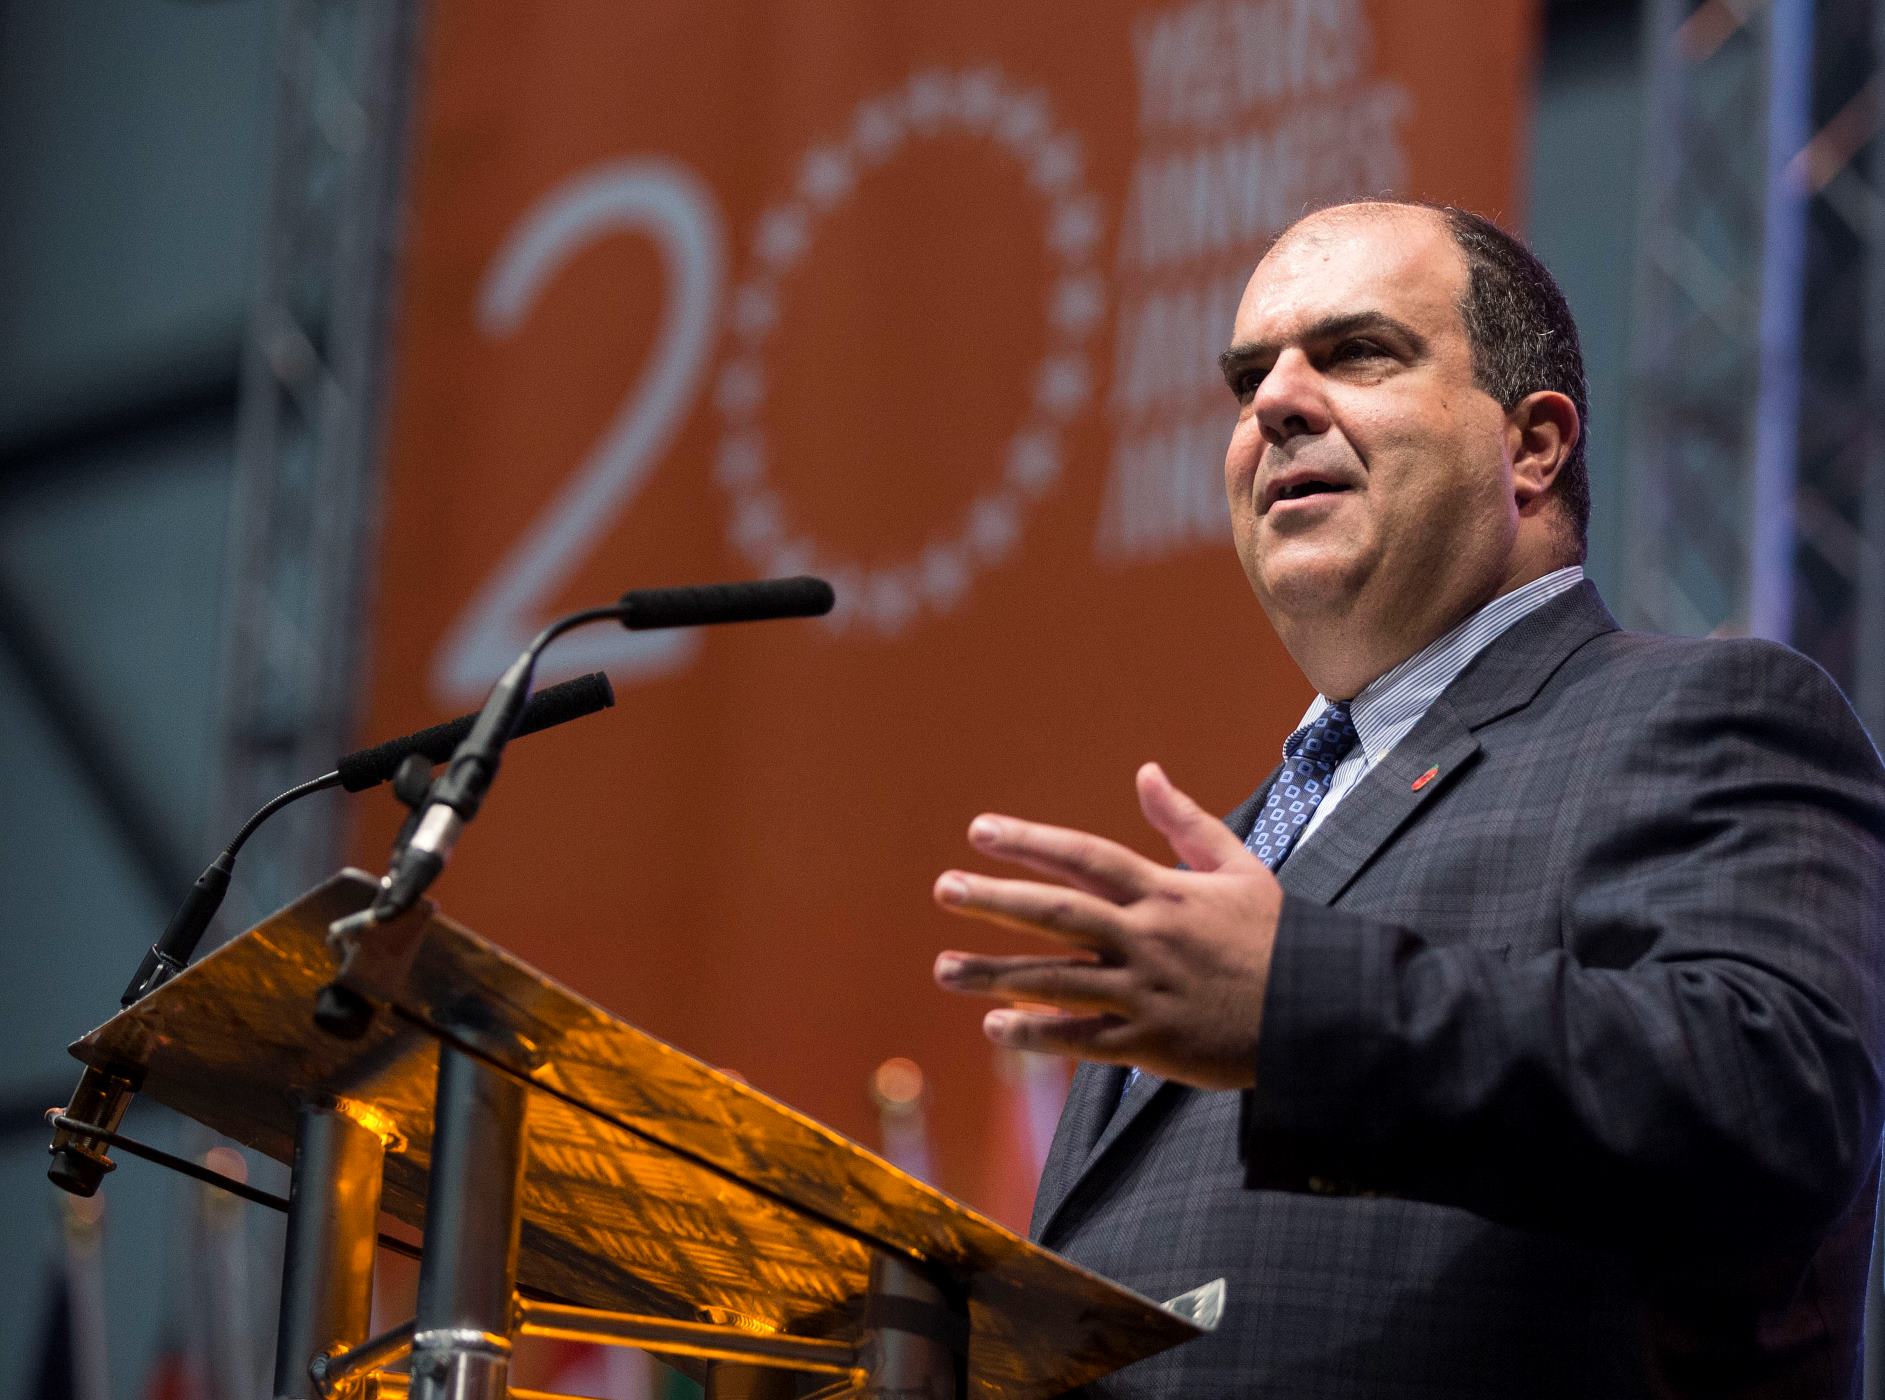 18-intriguing-facts-about-stelios-haji-ioannou